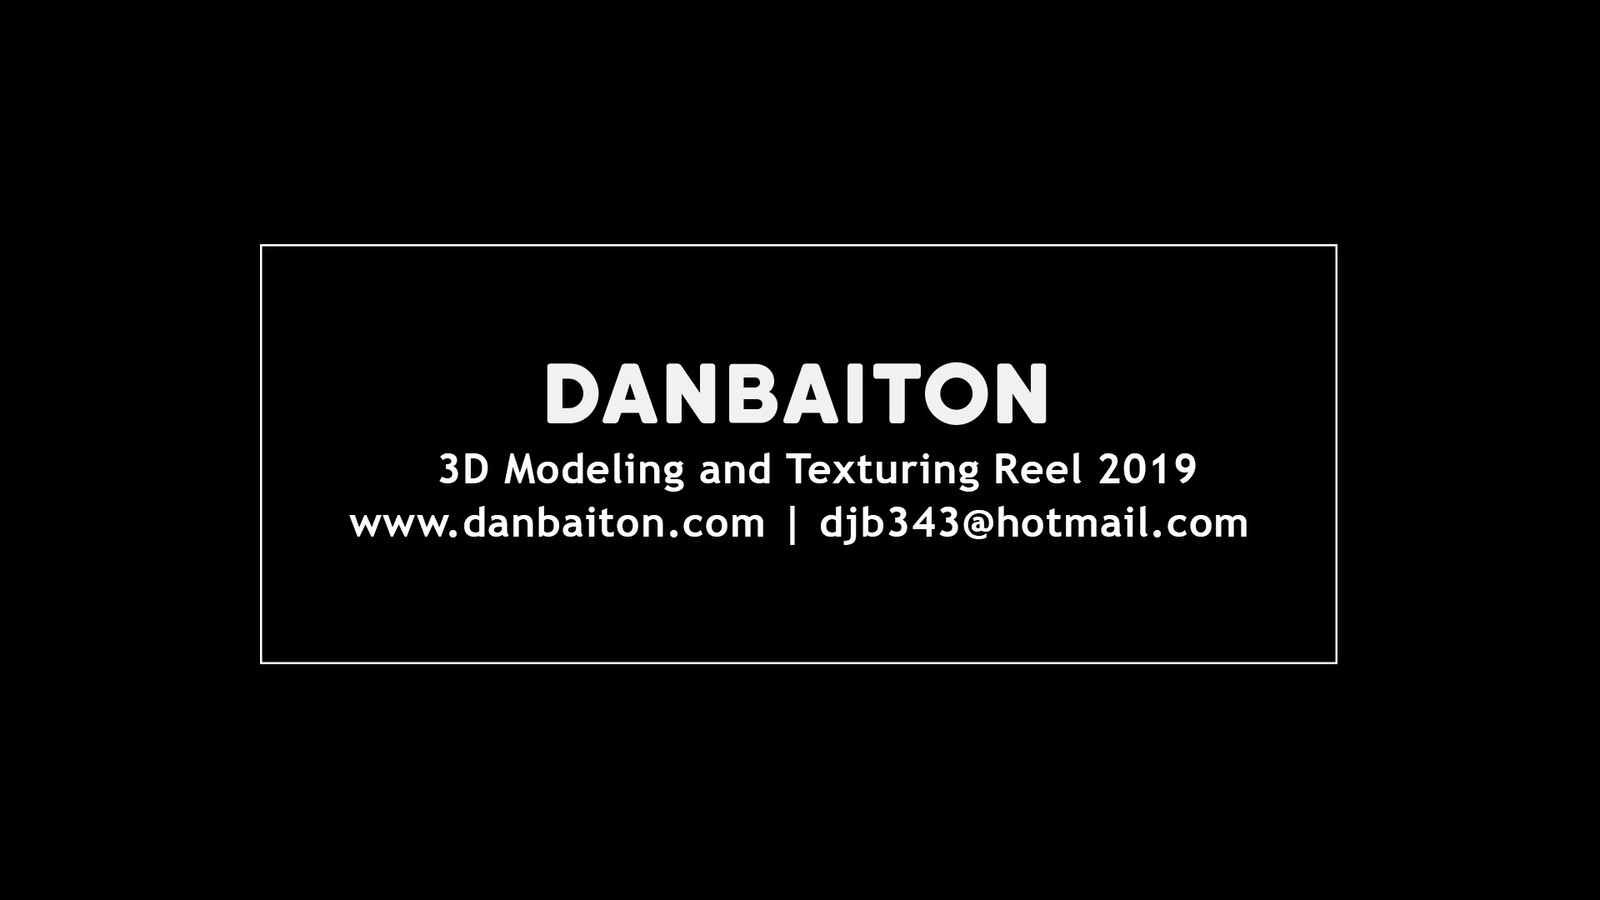 3D Modeling and Texturing Reel 2019